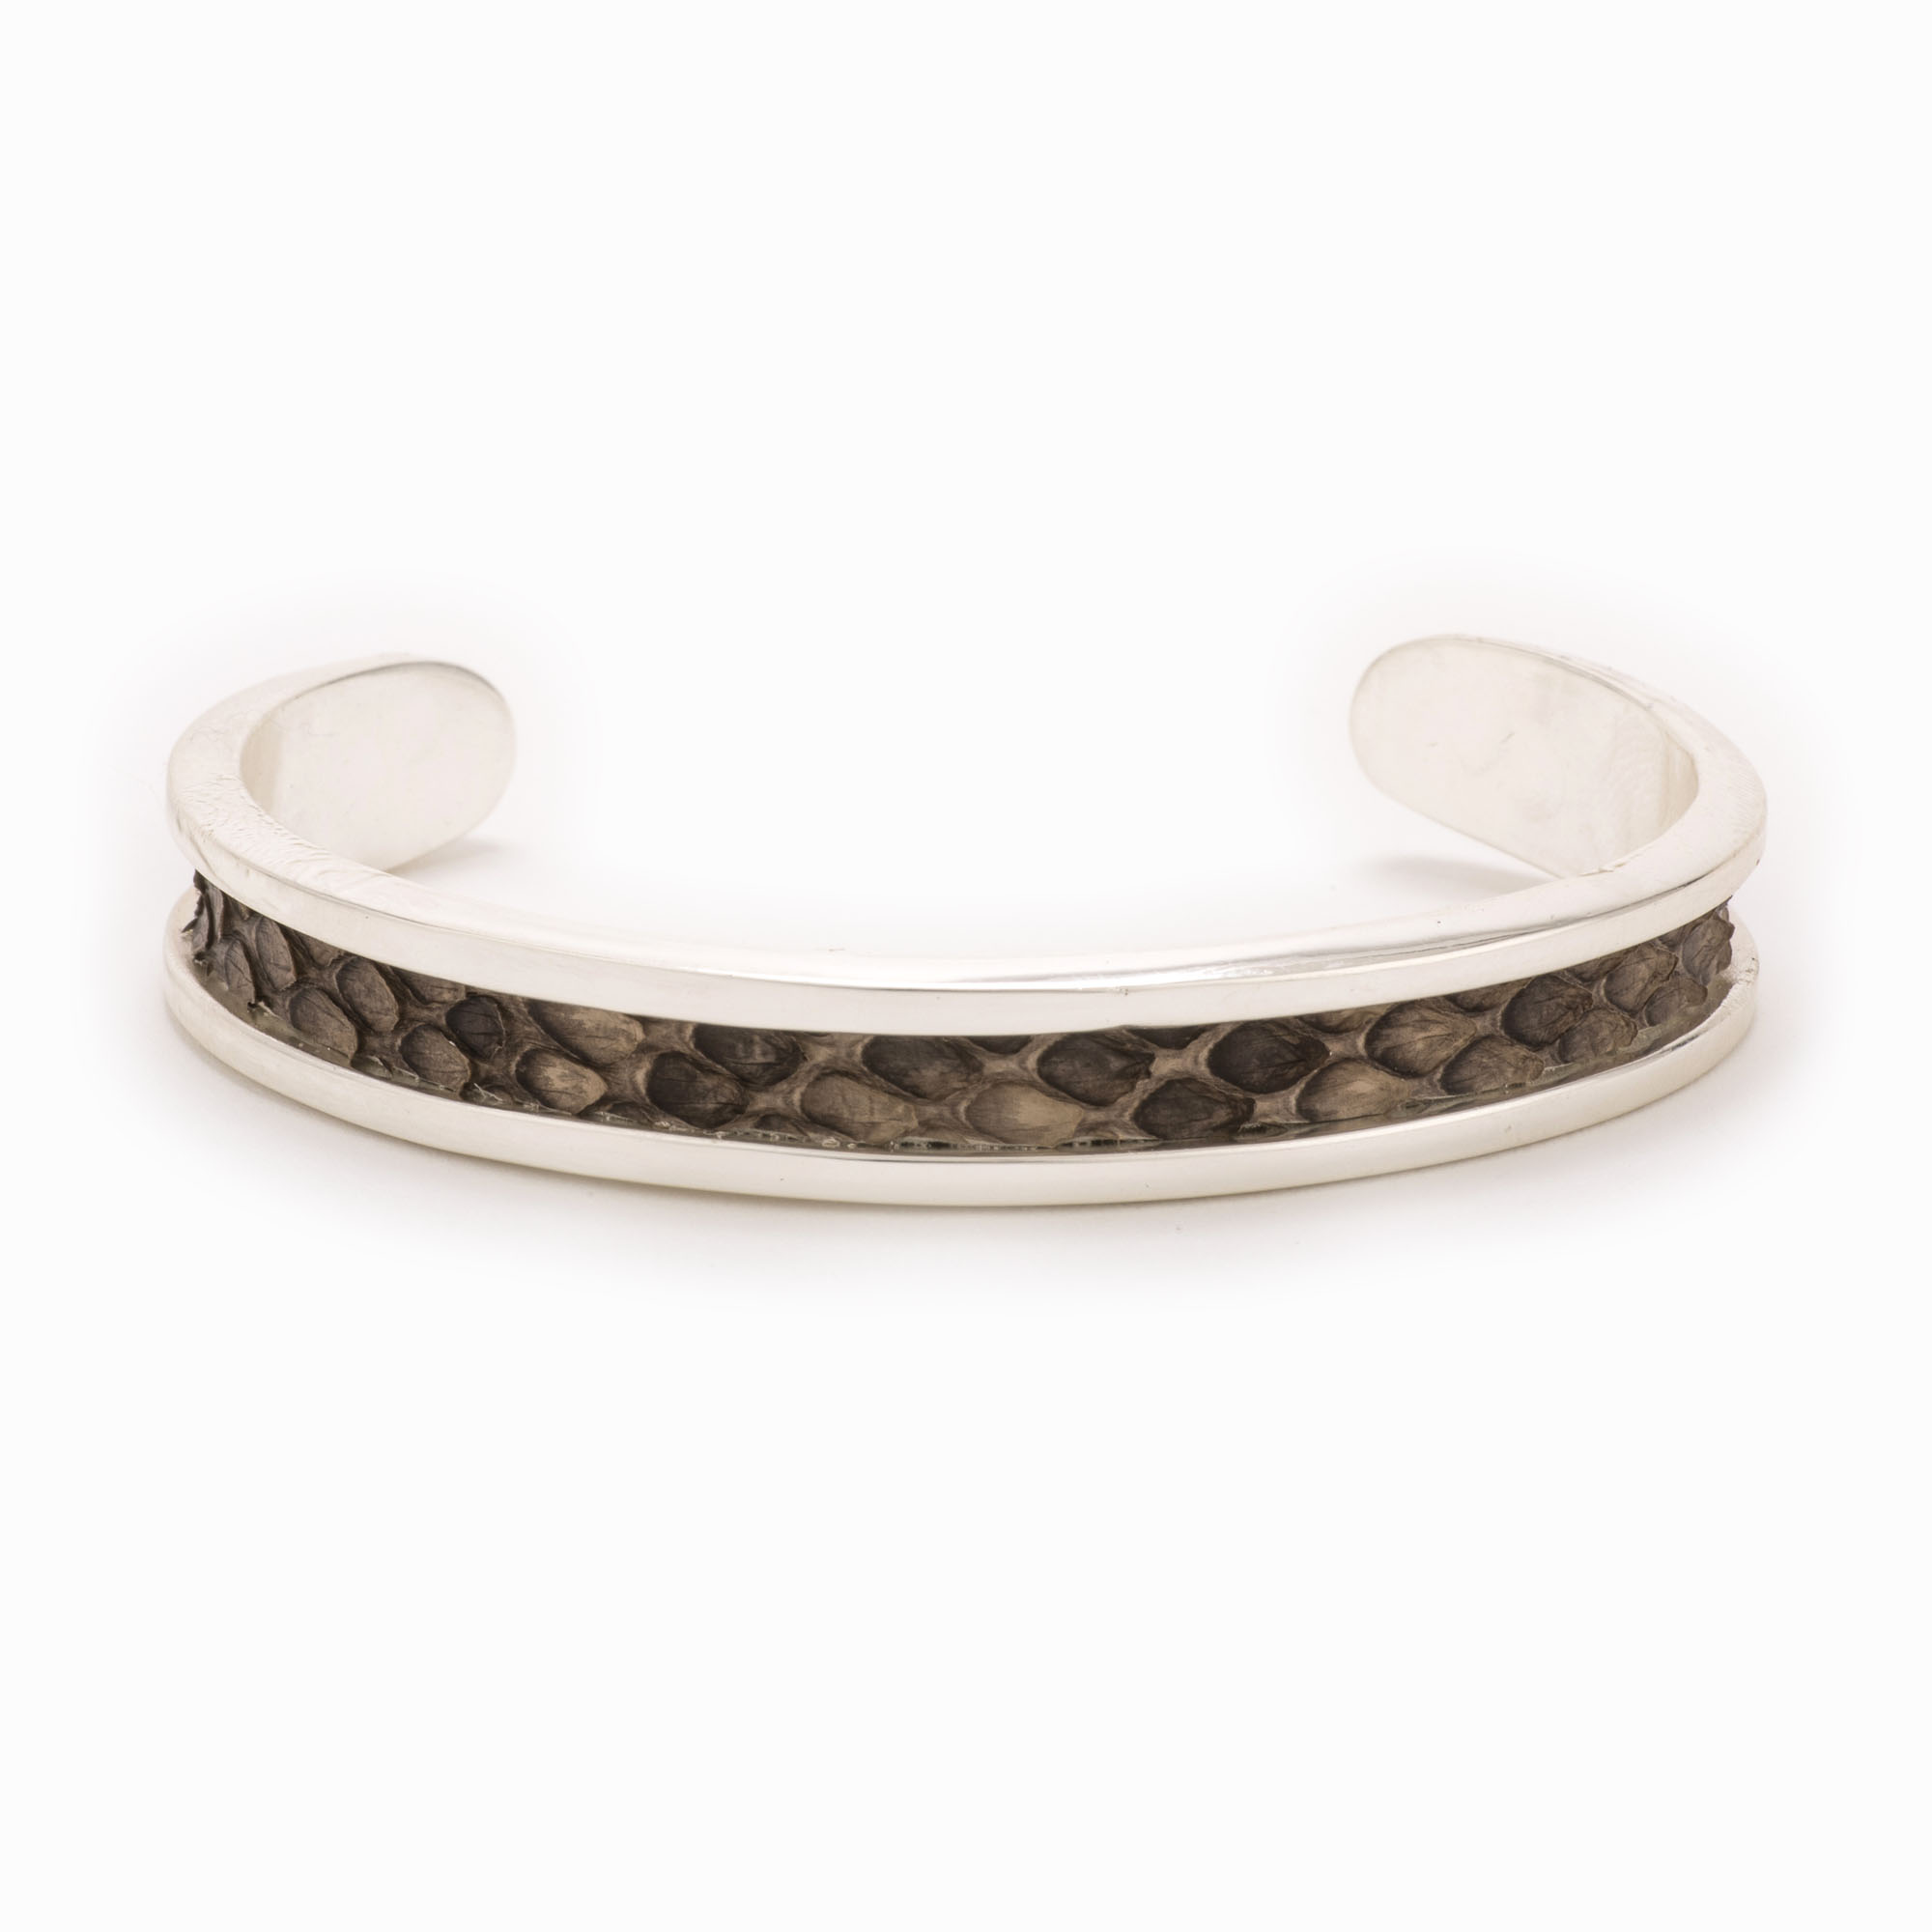 Featured image for “Small Grey & Brown Silver Cuff”